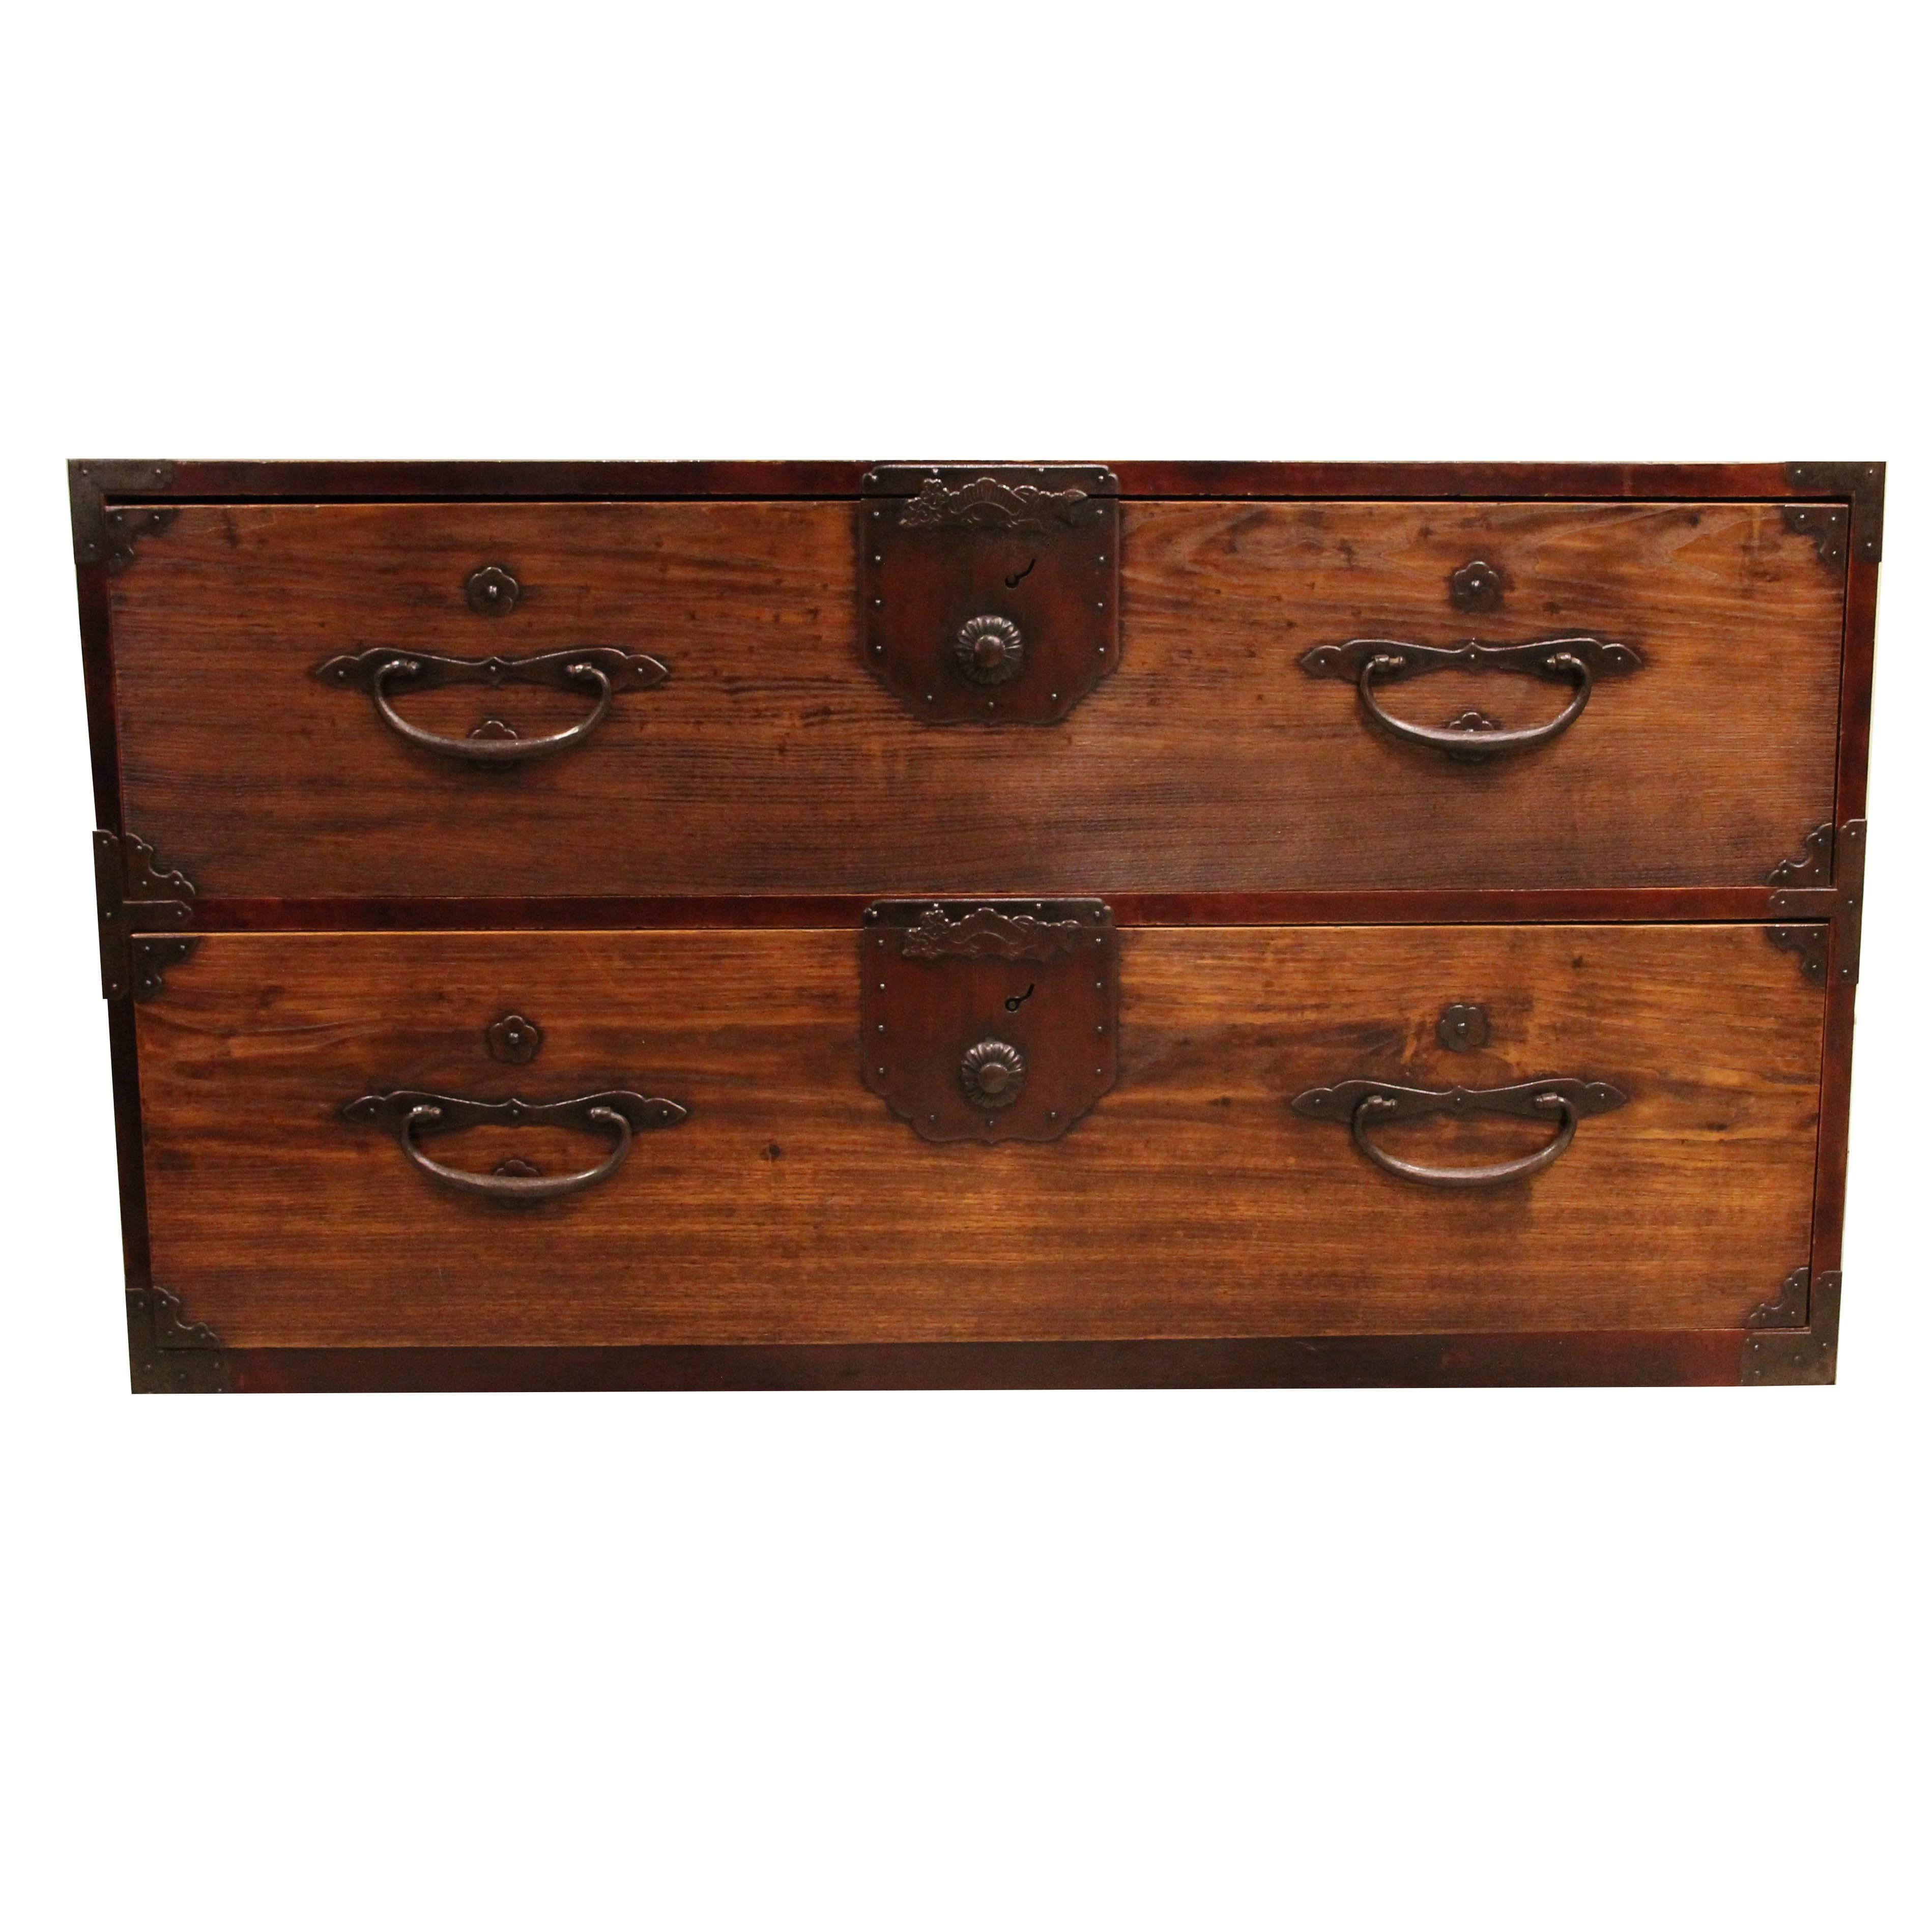 A Japanese clothing chest (isho-dansu).
The tansu with keyaki (zelkova) wood drawer and door fronts with rich translucent red lacquer finish and sugi (cryptomeria) wood case in two sections which latch together. The doors and drawers with finely